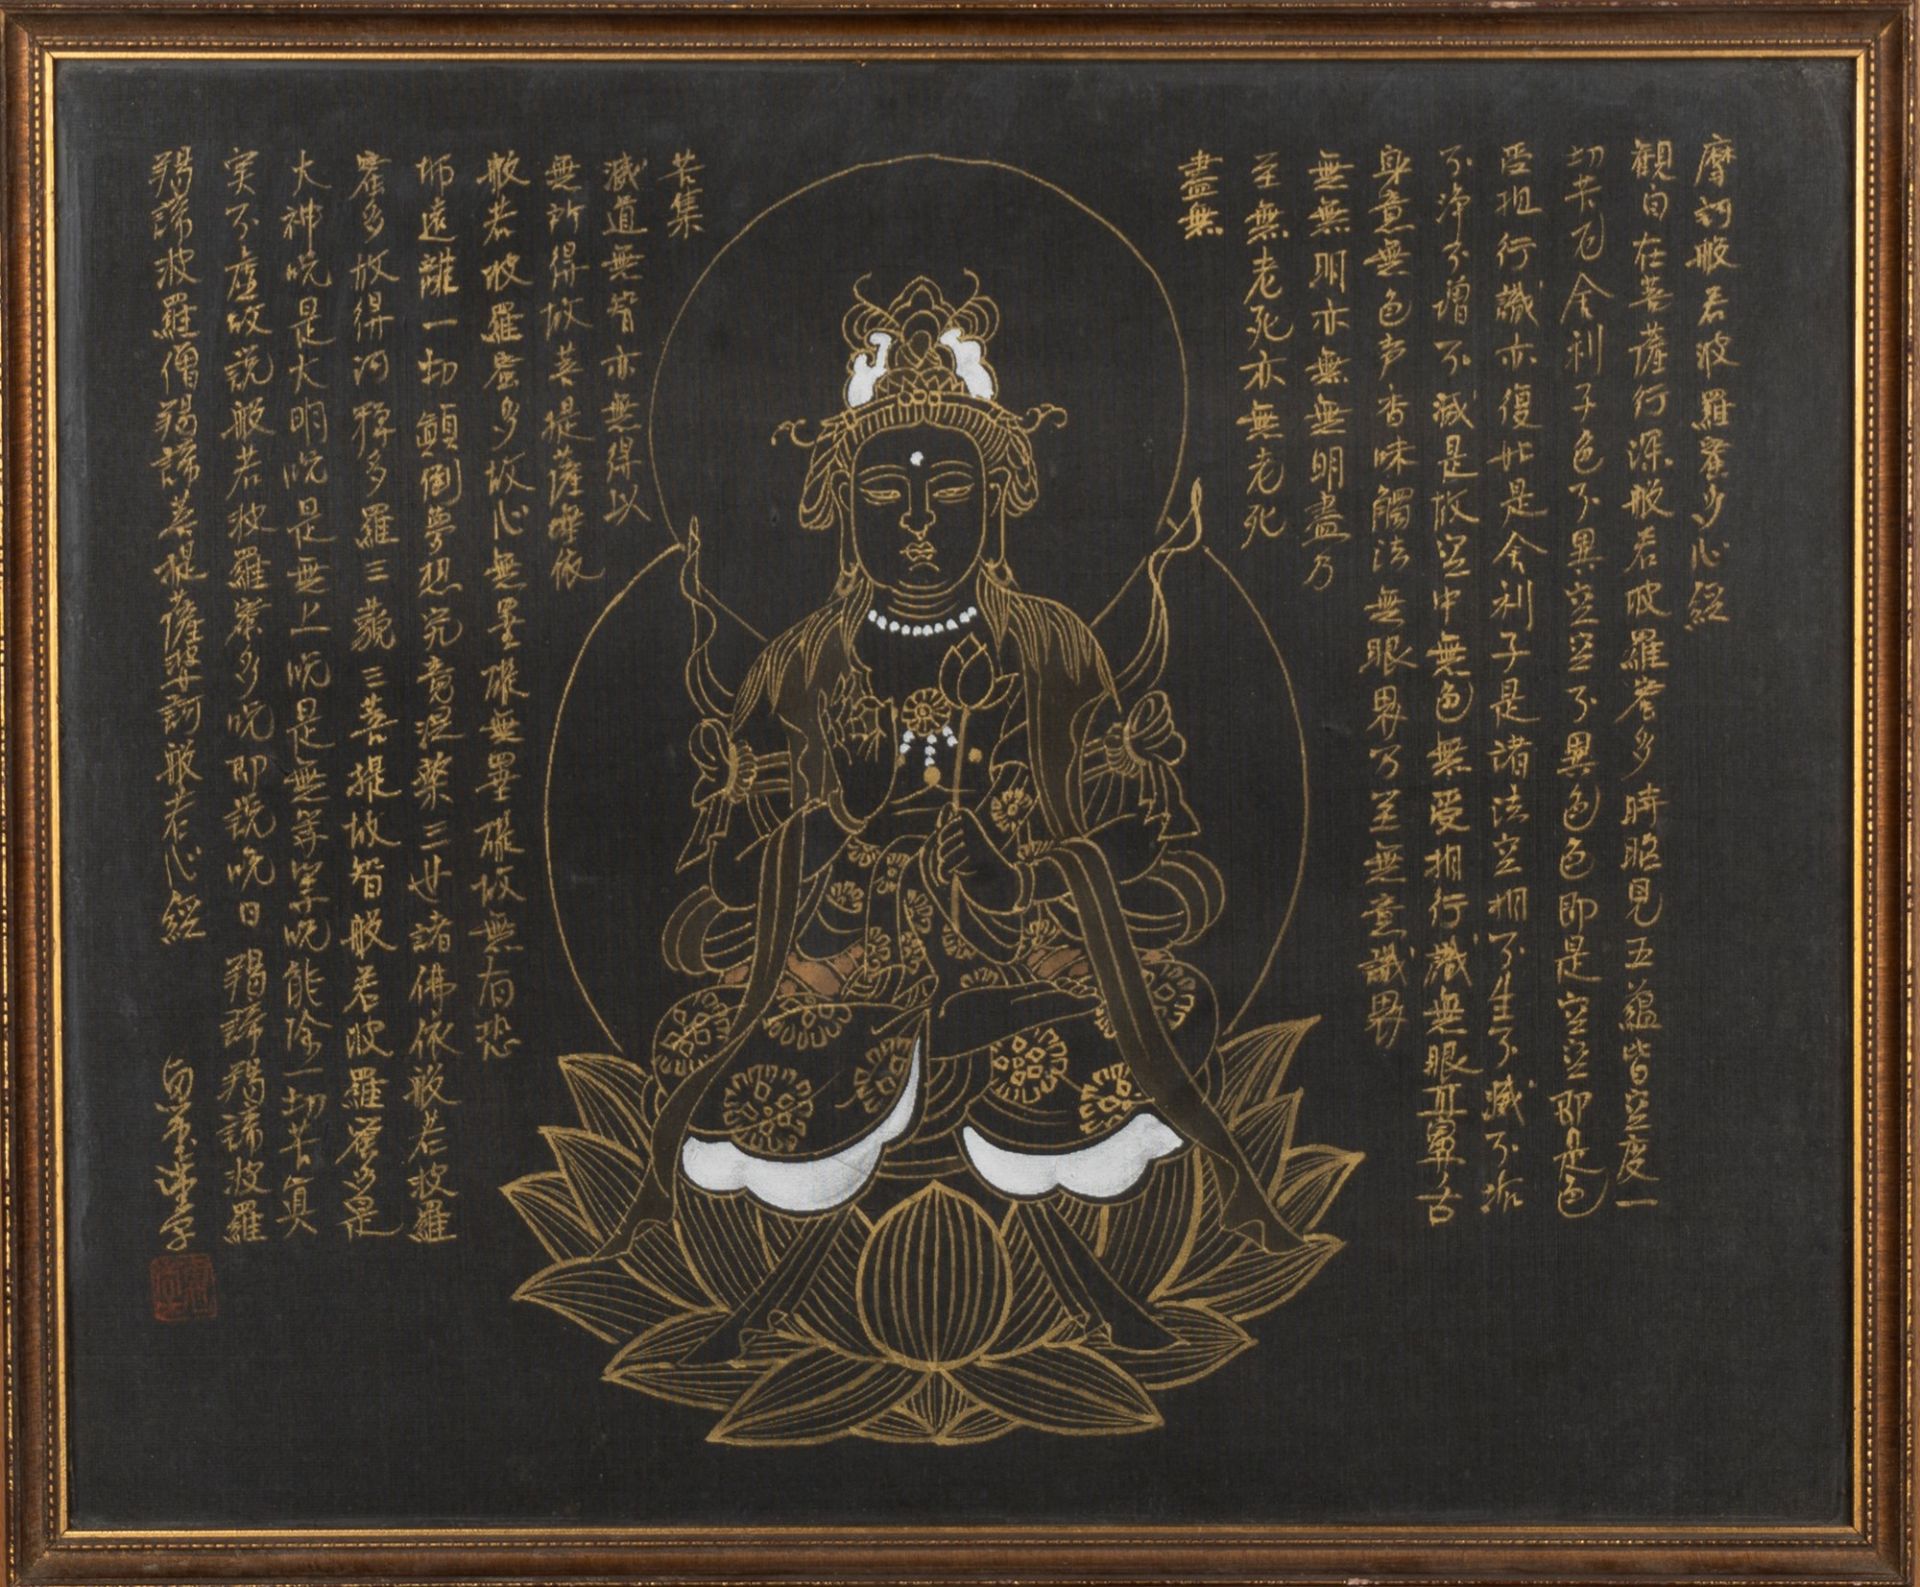 Silk painting representing Buddha seated on a lotus flower, China, 20th century